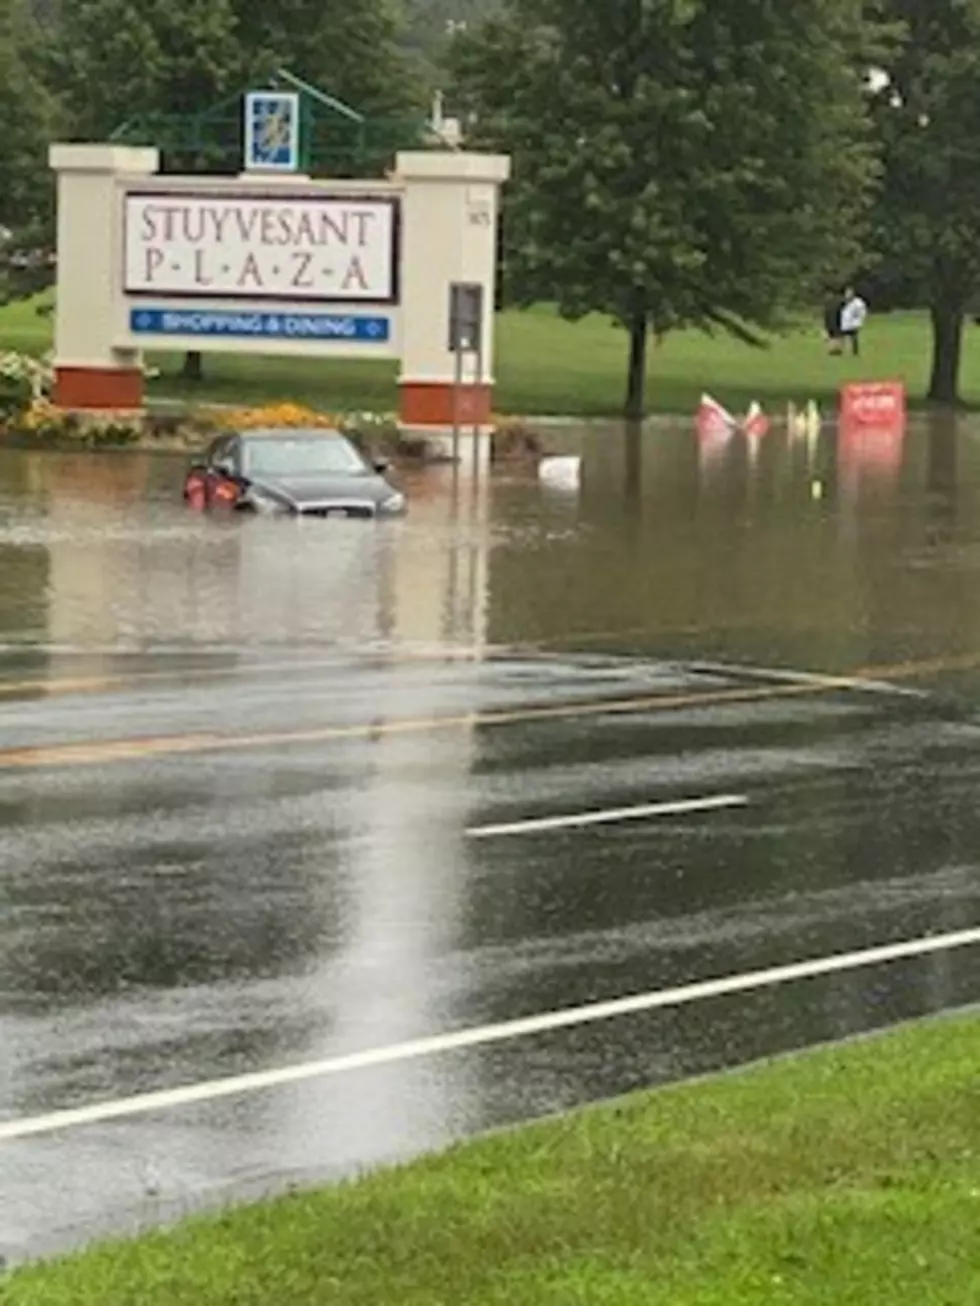 Rain Storm Causes Power Outages and Flooding All over the Capital Region